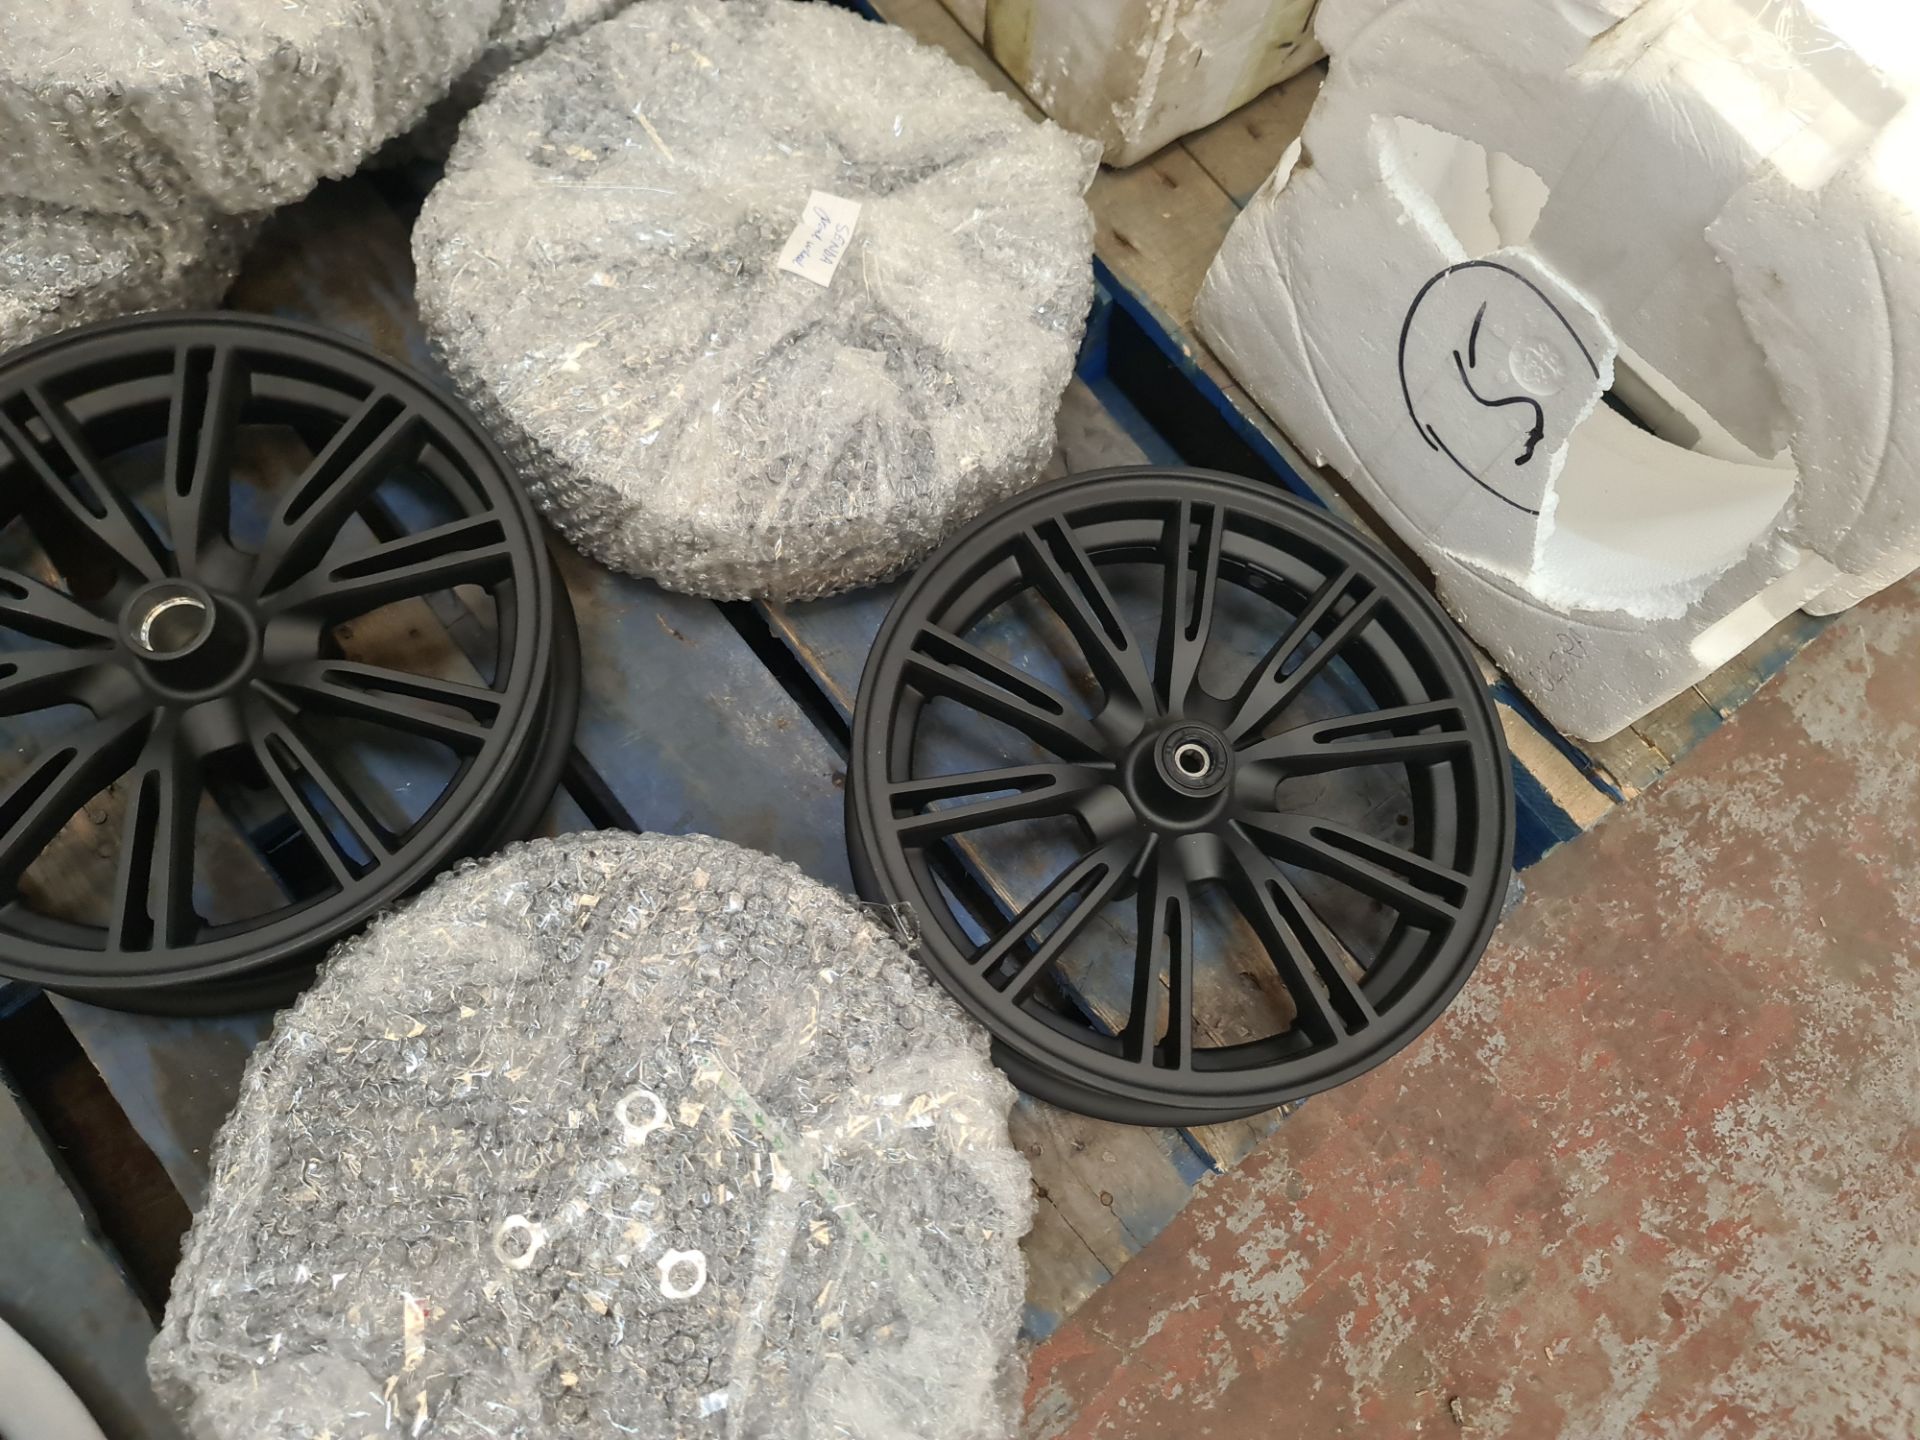 9 off assorted bike front wheels, the contents of a pallet - Image 4 of 7